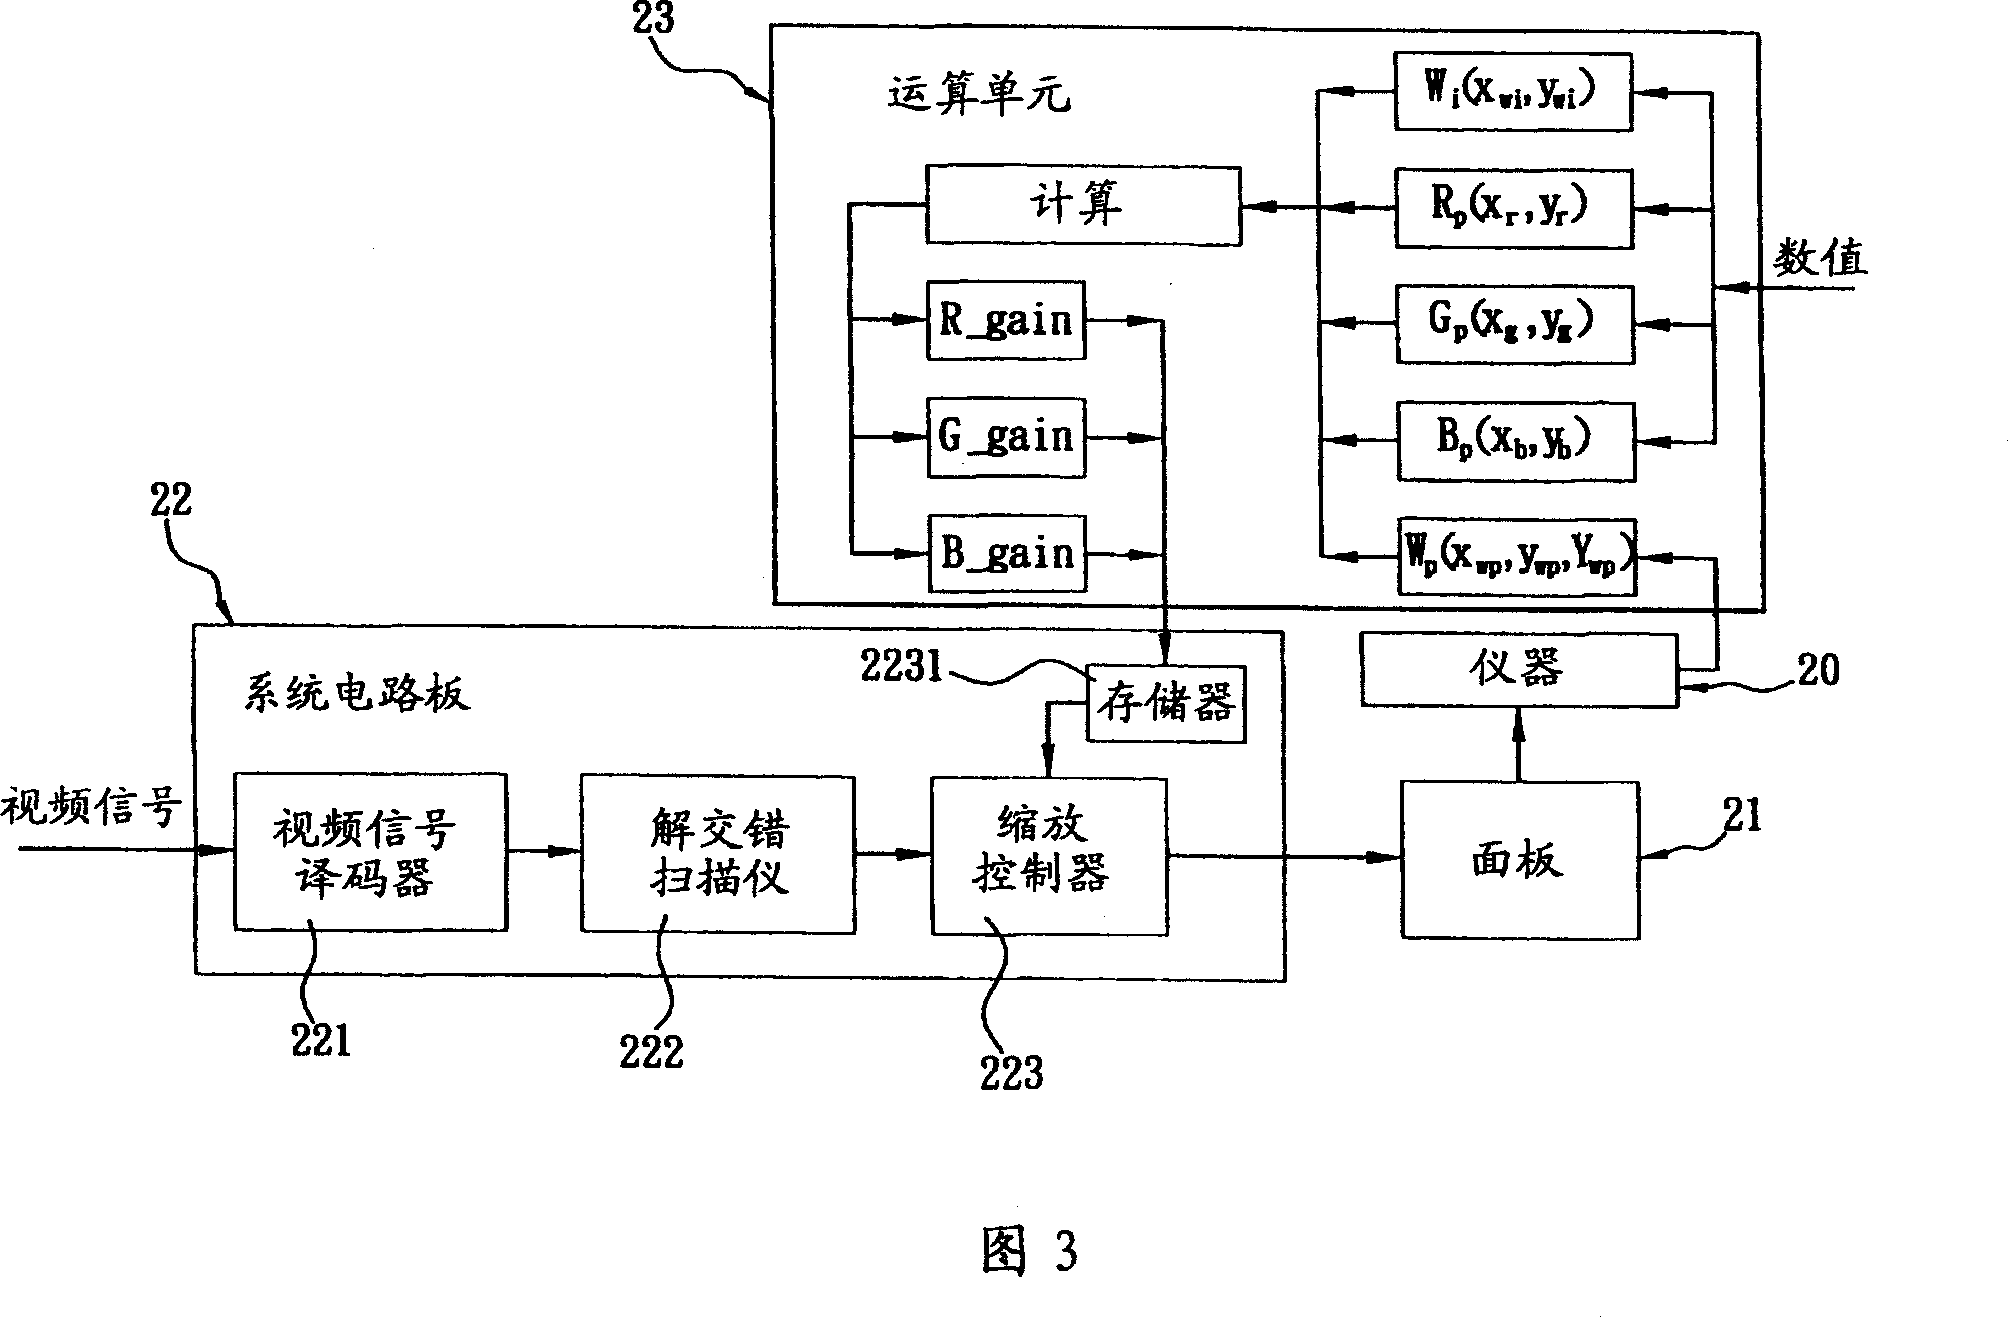 Method and system for automatic measuring and regulating gray level white balance of display apparatus